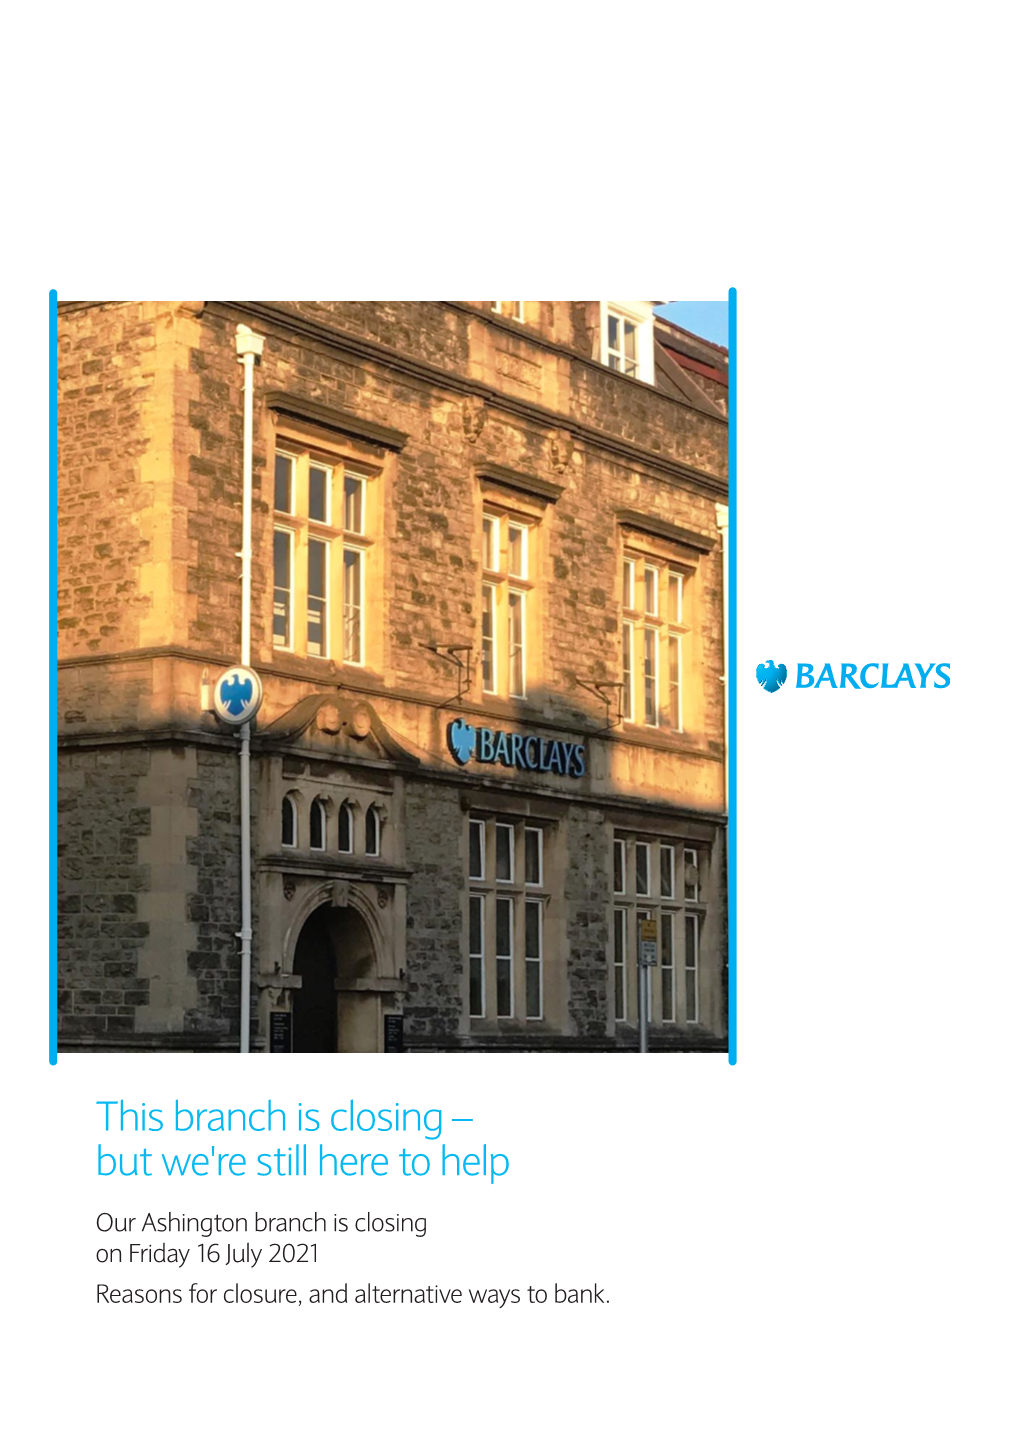 Ashington Branch Is Closing on Friday 16 July 2021 Reasons for Closure, and Alternative Ways to Bank